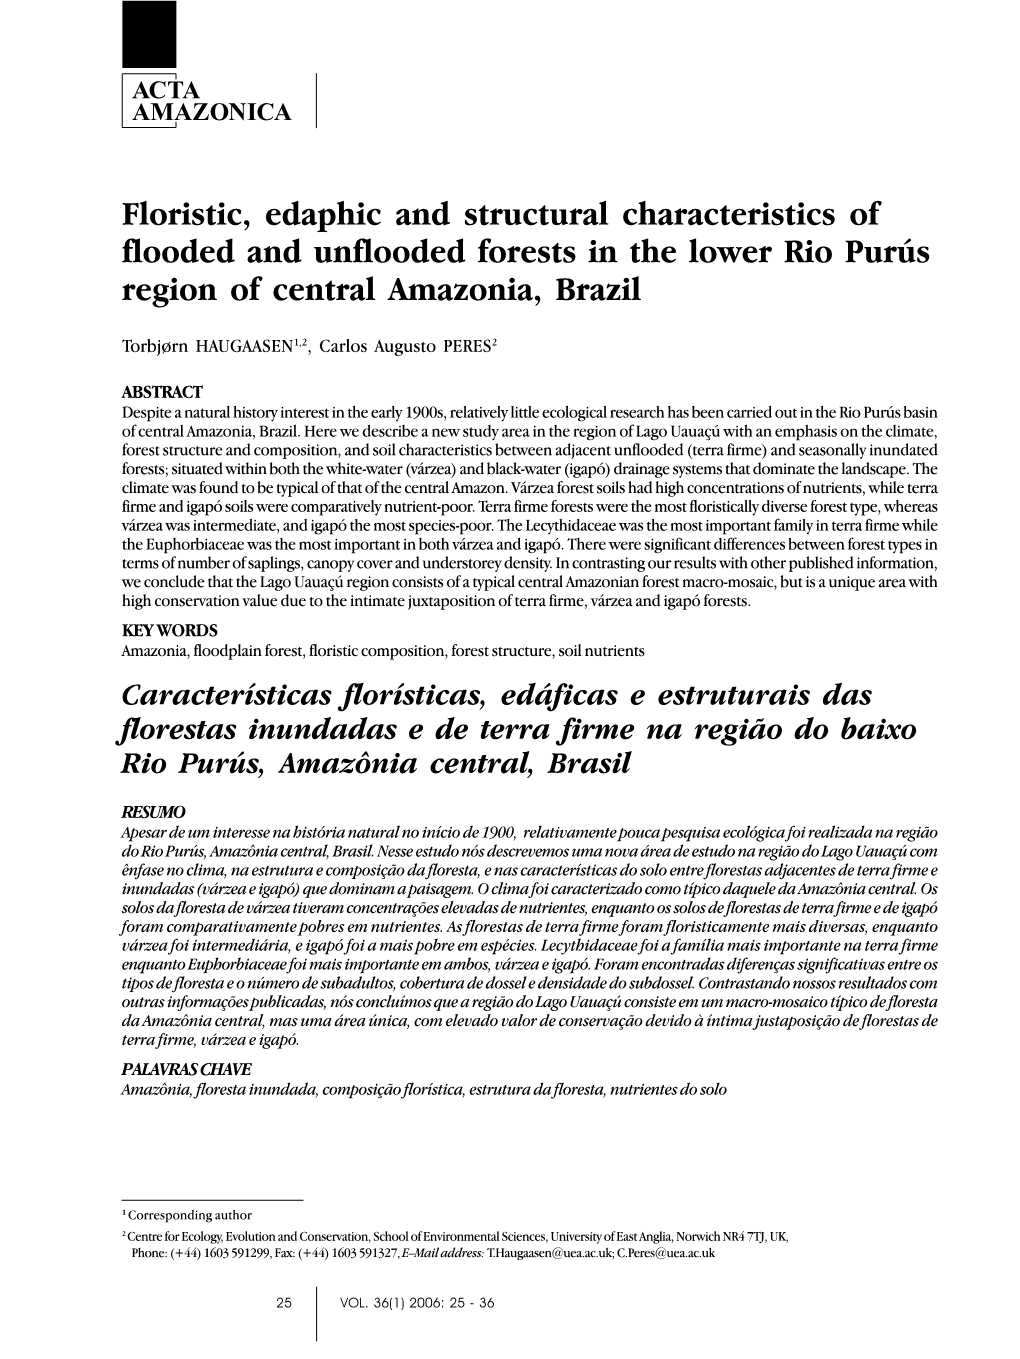 Floristic, Edaphic and Structural Characteristics of Flooded and Unflooded Forests in the Lower Rio Purús Region of Central Amazonia, Brazil